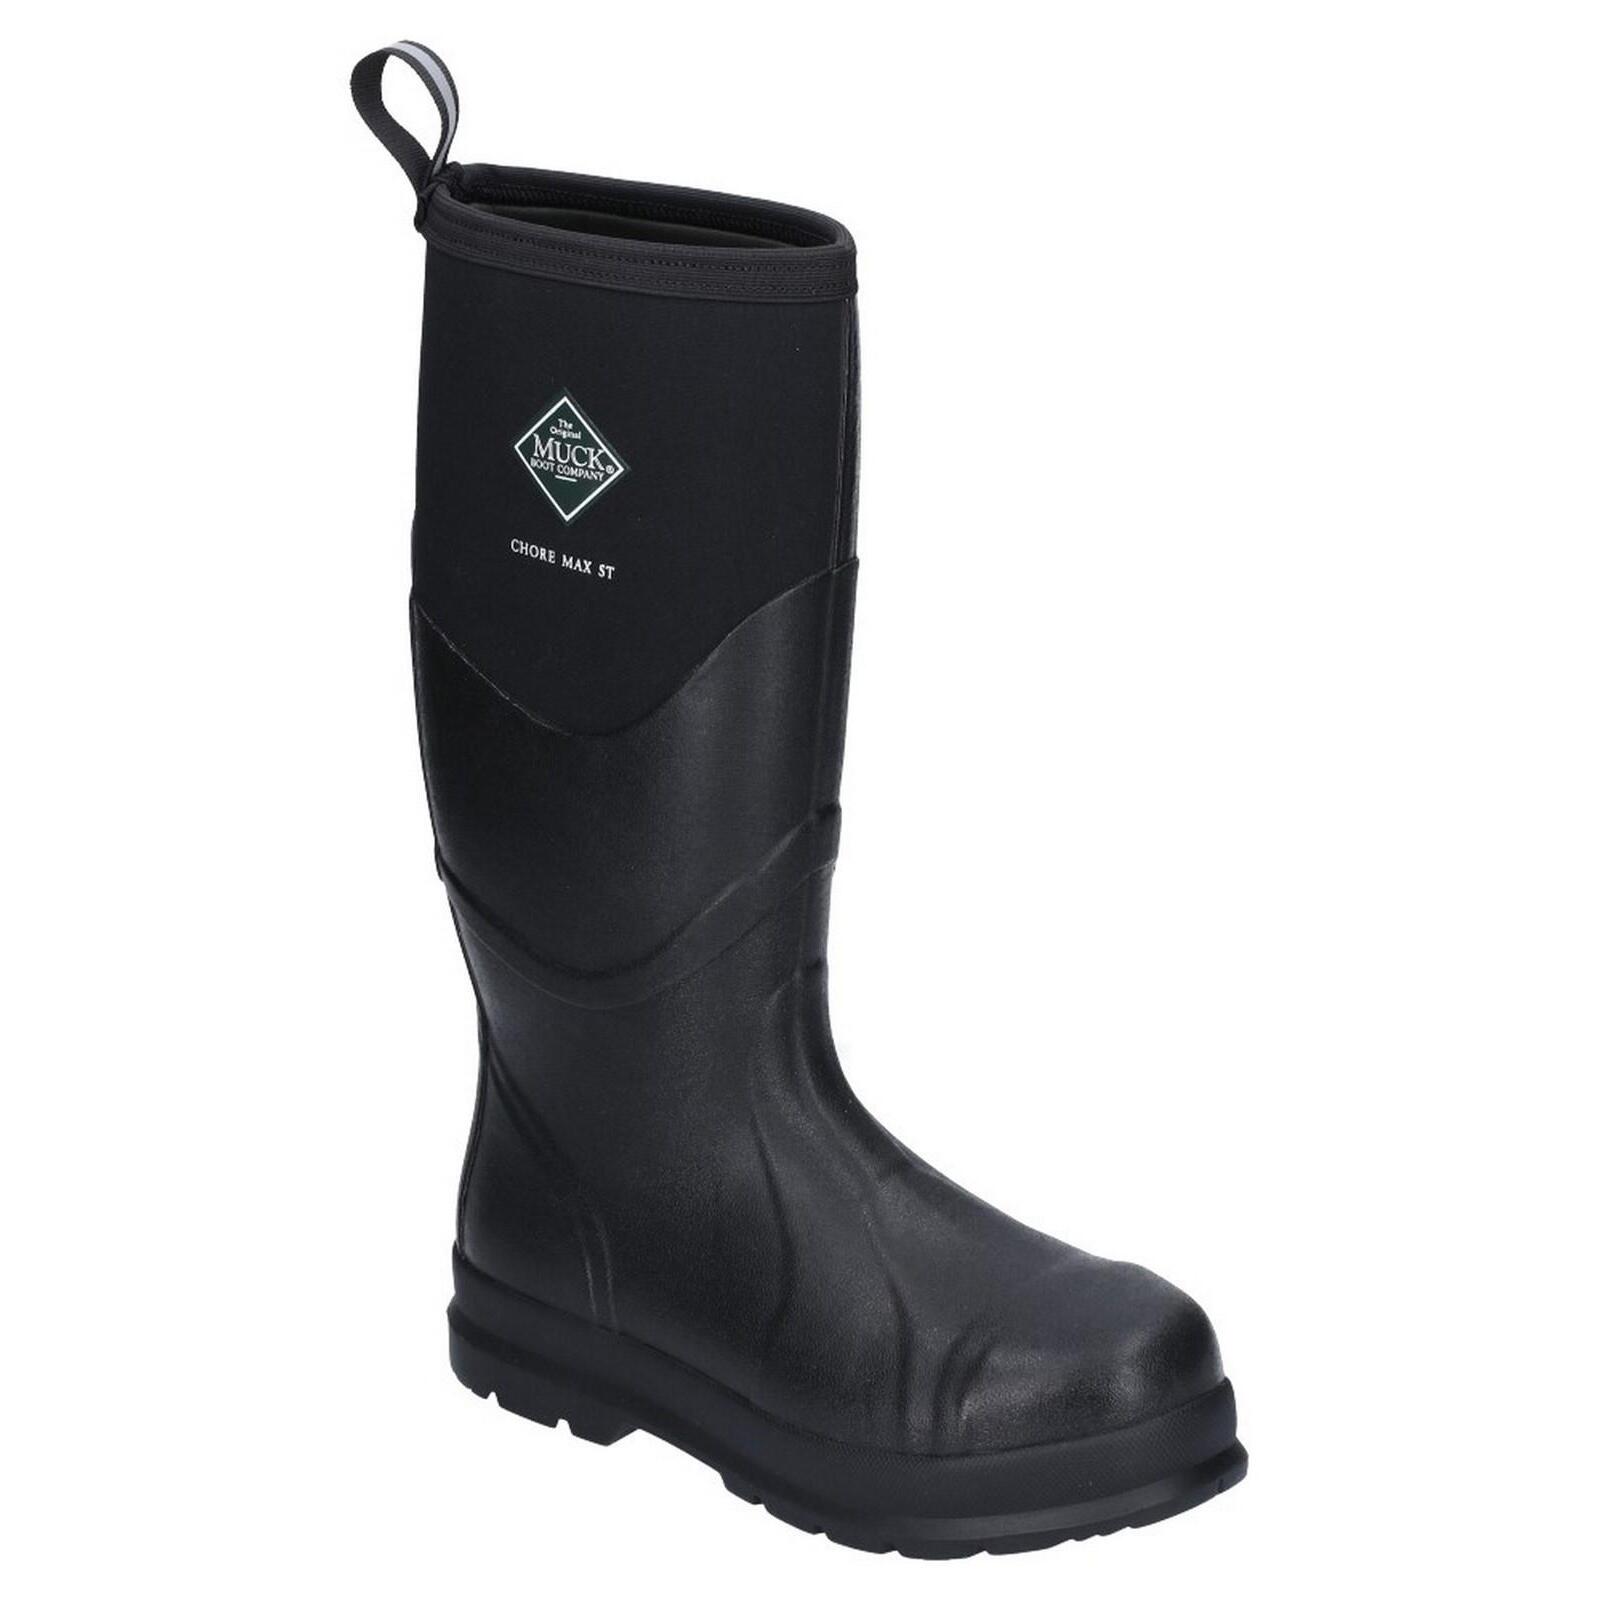 MUCK BOOTS Unisex Adults Chore Max S5 Safety Welllington (Black)